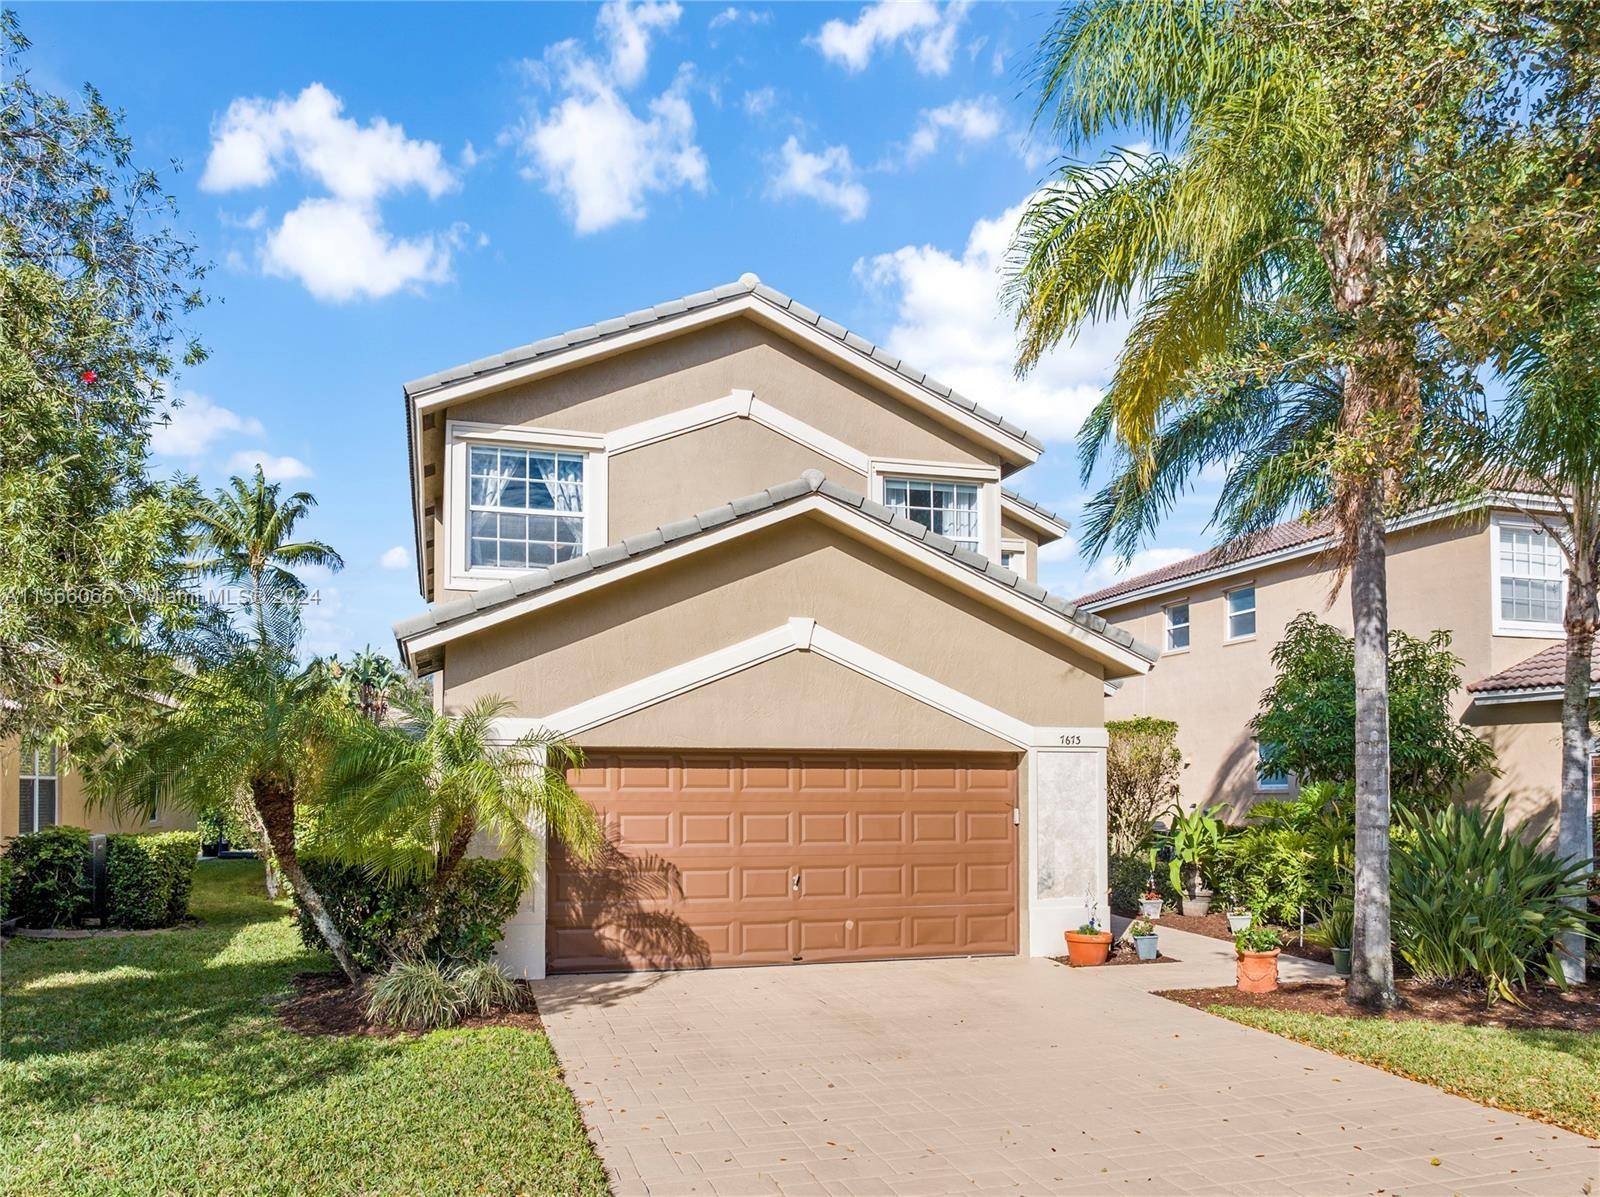 A spacious 2 story home in a gated community This residence features an extended patio area, a walk in closet, and a luxurious primary bath with two vanities, a separate ...